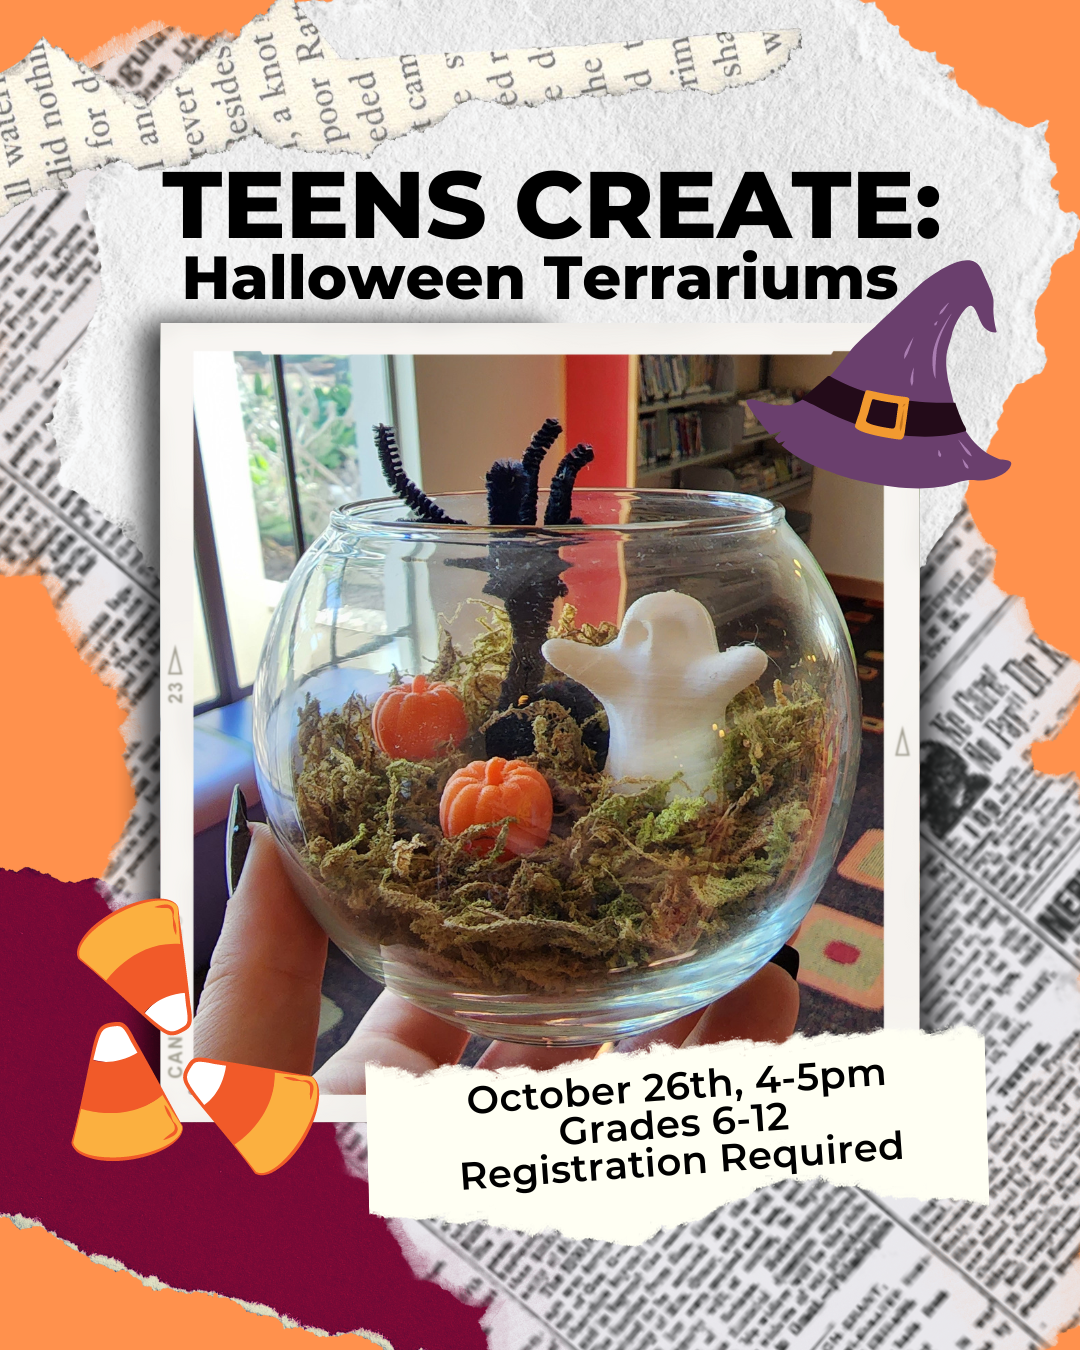 Teens Create: Halloween Terrariums. Wednesday October 26th 4pm -5pm. Registration Required